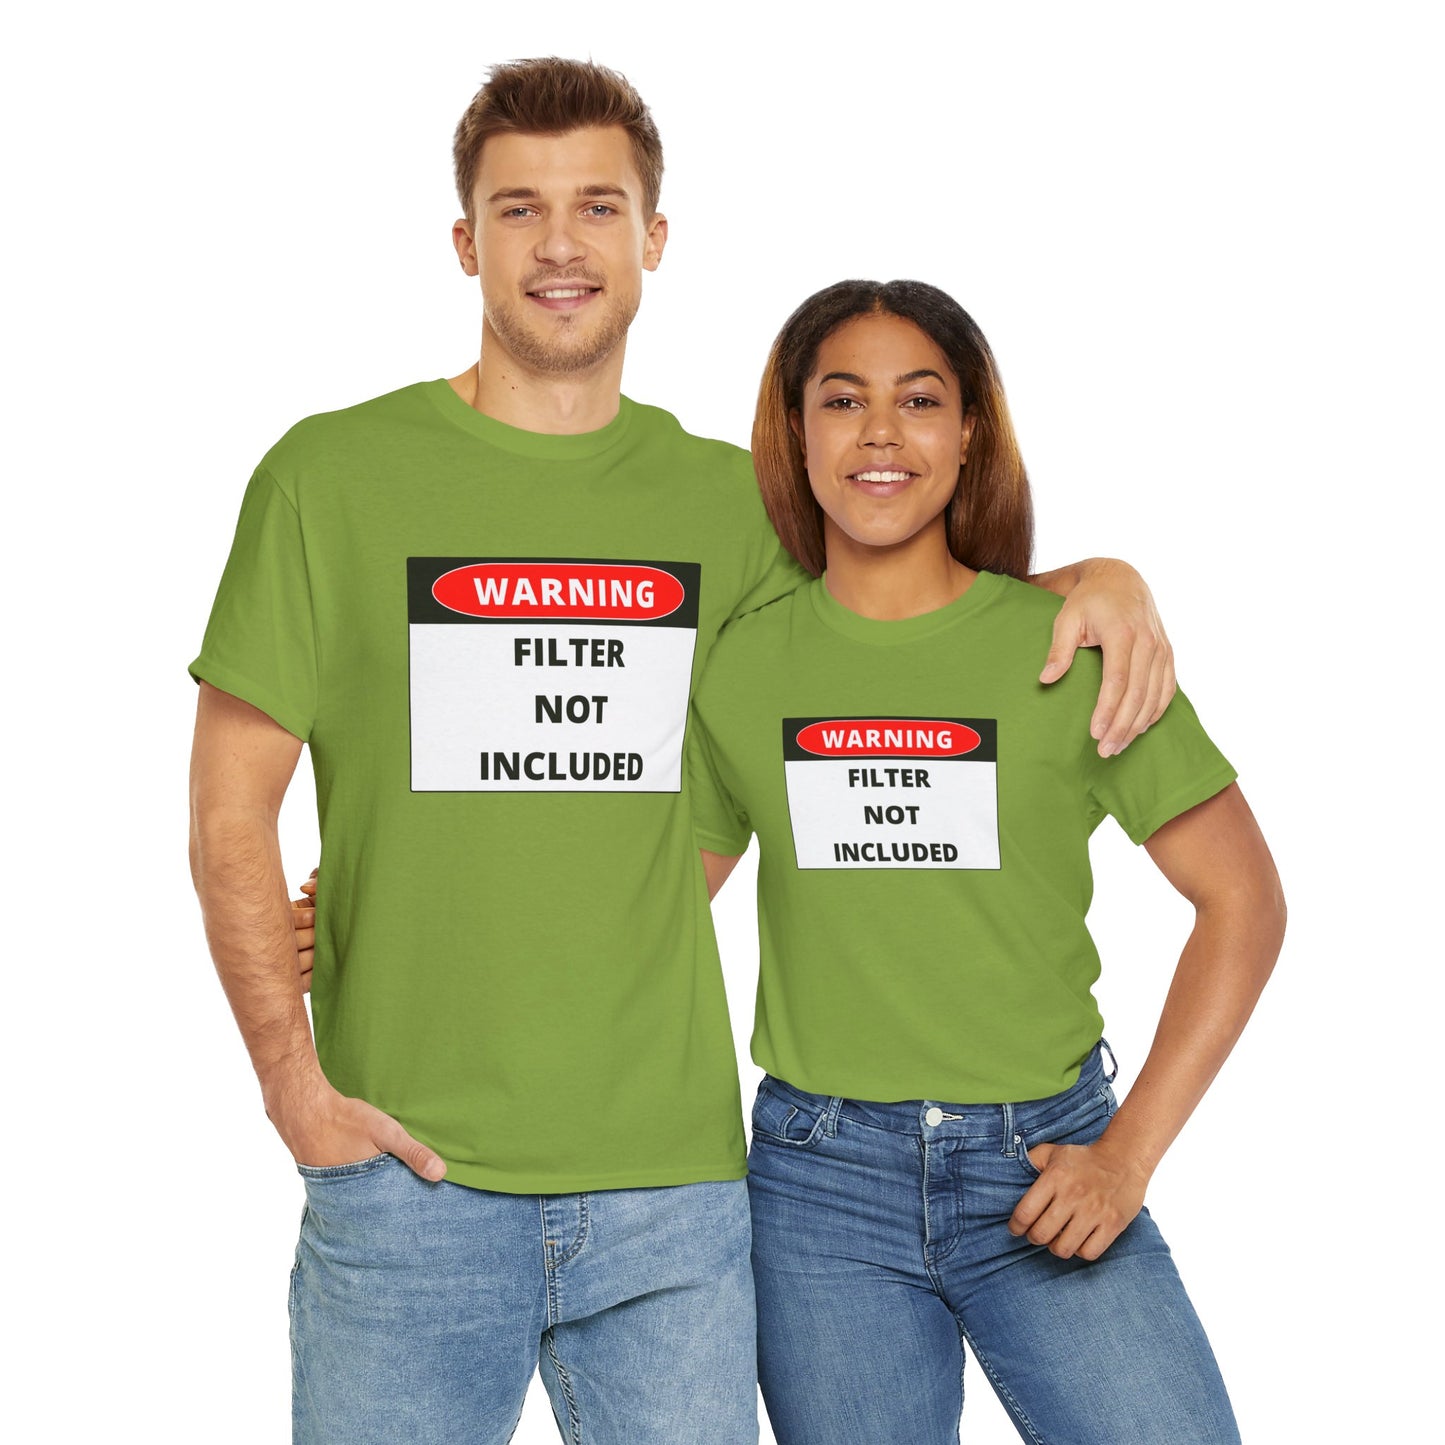 "Warning: Filter Not Included" Unisex T-Shirt - Wear Your Candid Attitude with Pride! Unisex Heavy Cotton Tee